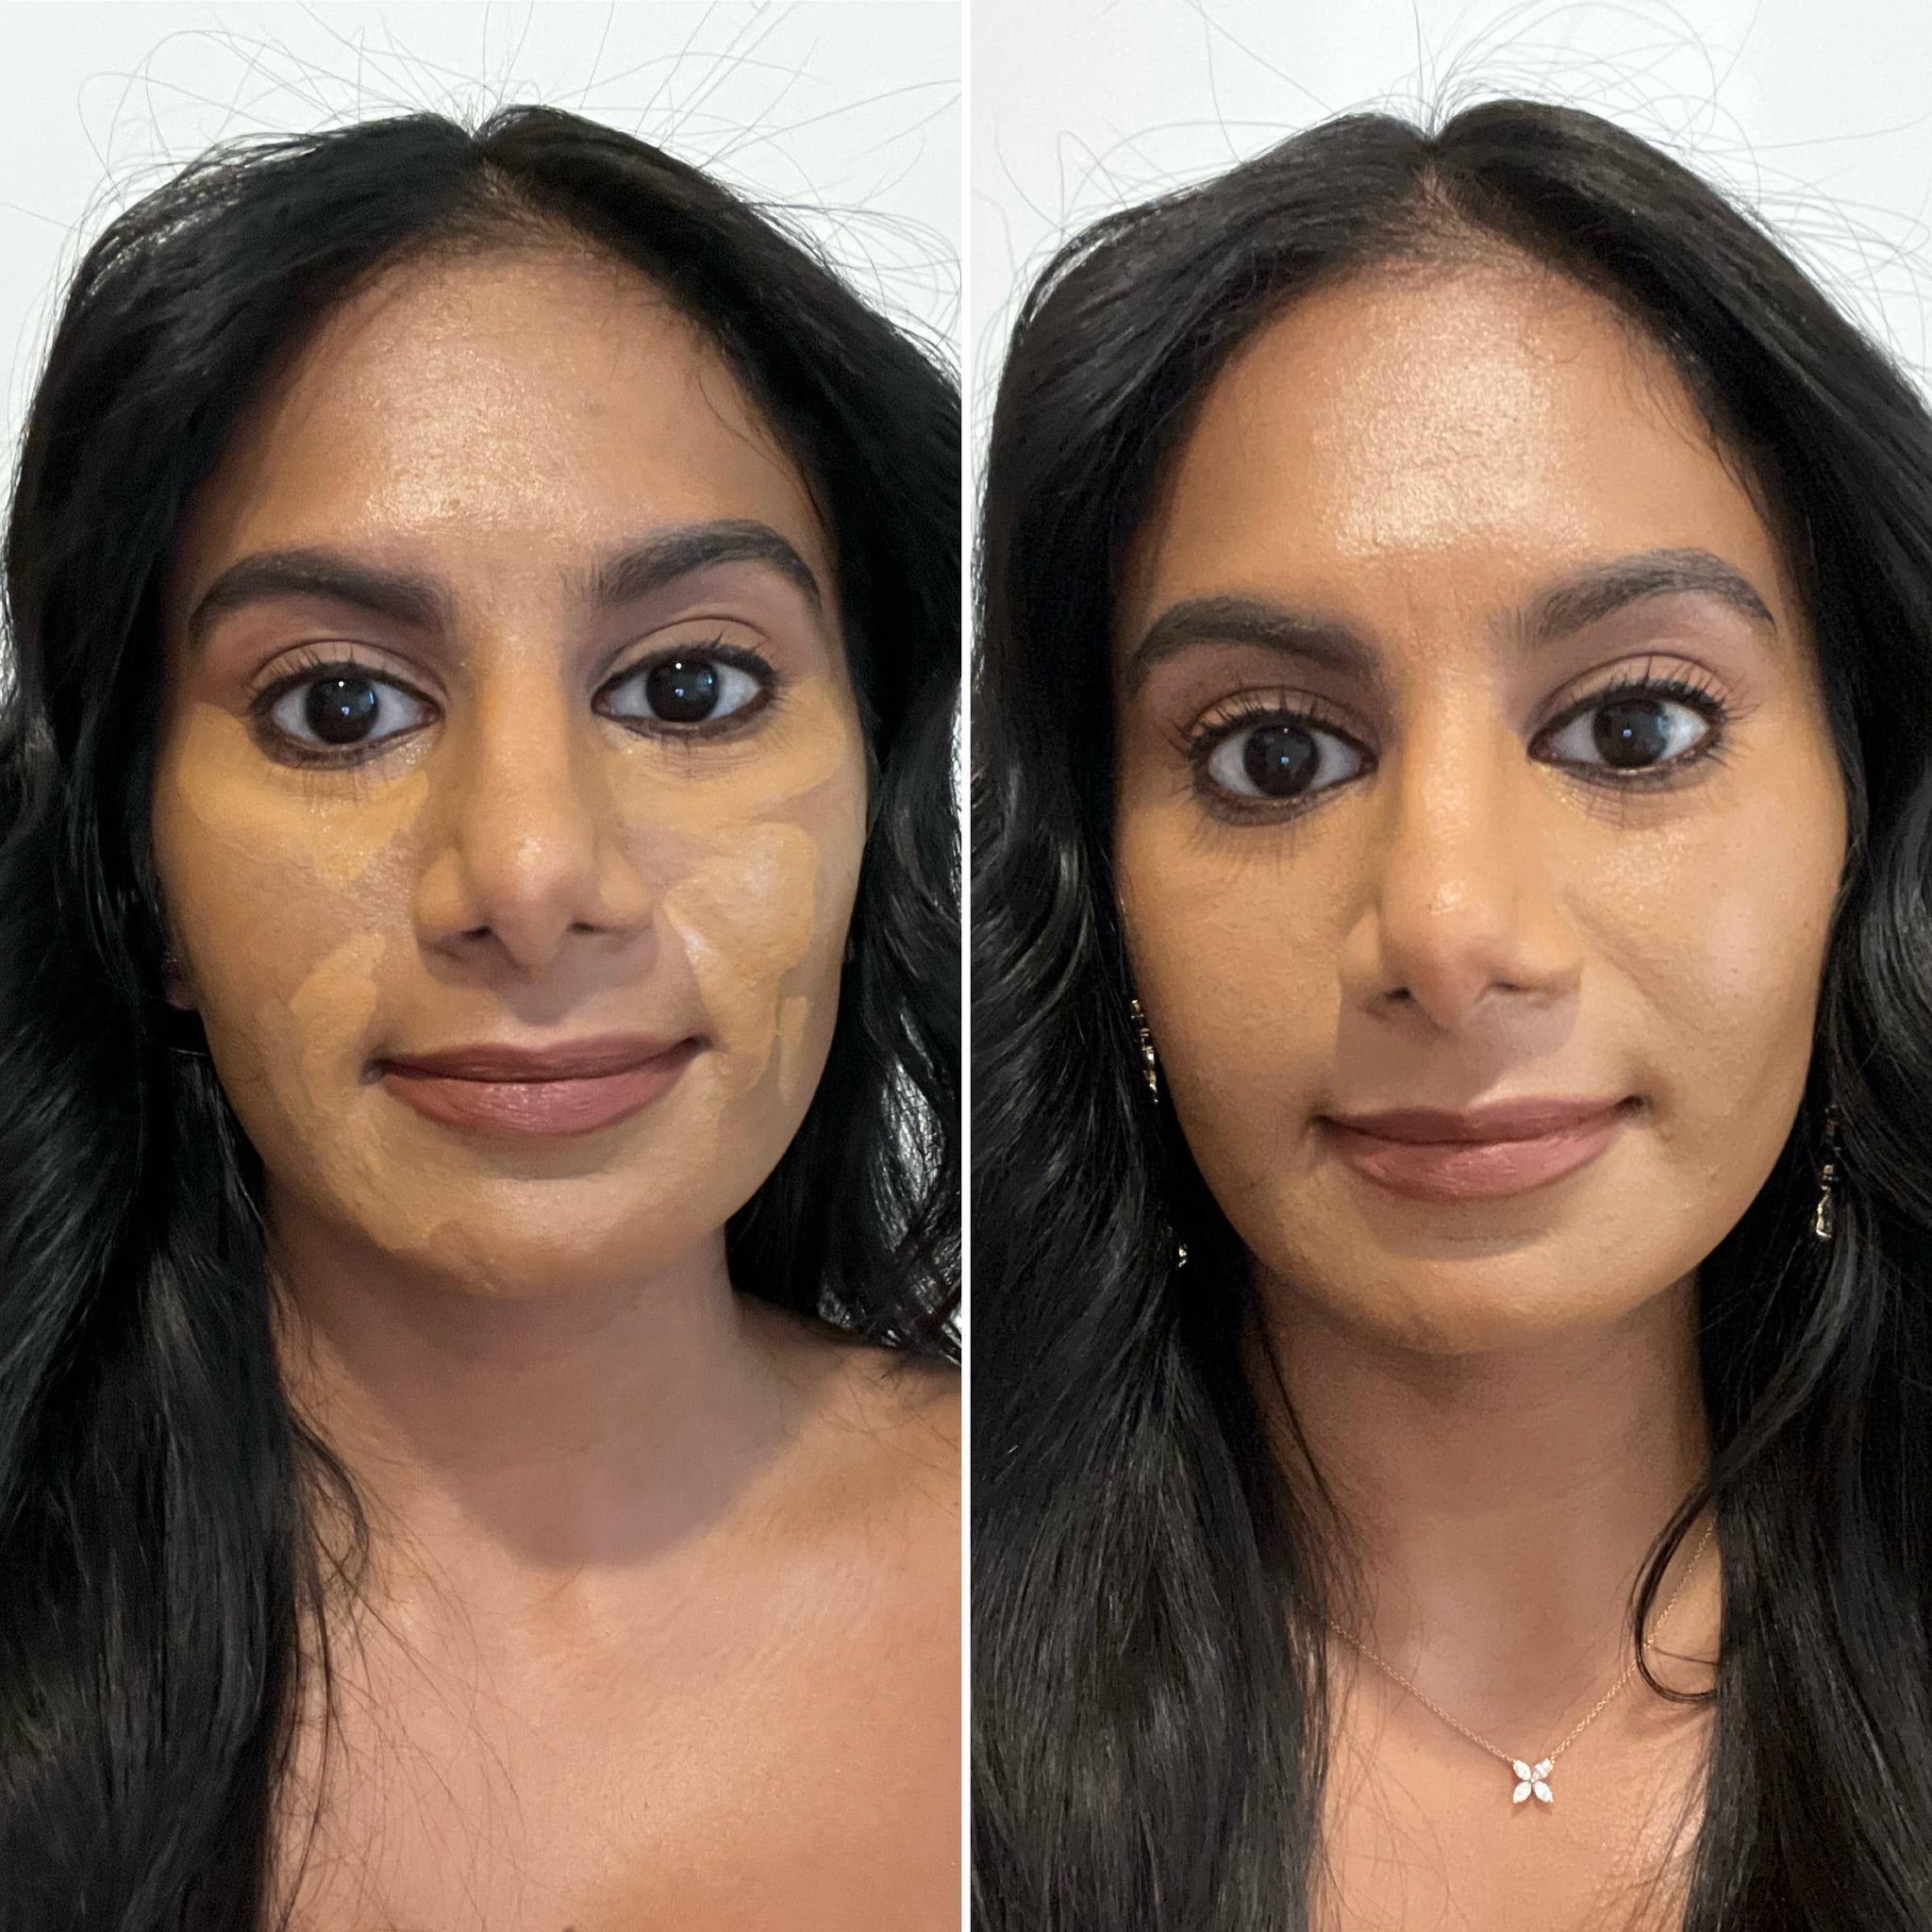 woman applying the Huda Beauty #FauxFilter Luminous Matte Buildable Coverage Crease Proof Concealer in shade Praline 6.3 Neutral.  The right side is the concealer applied onto the face unblended, the left side is the concealer blended out.